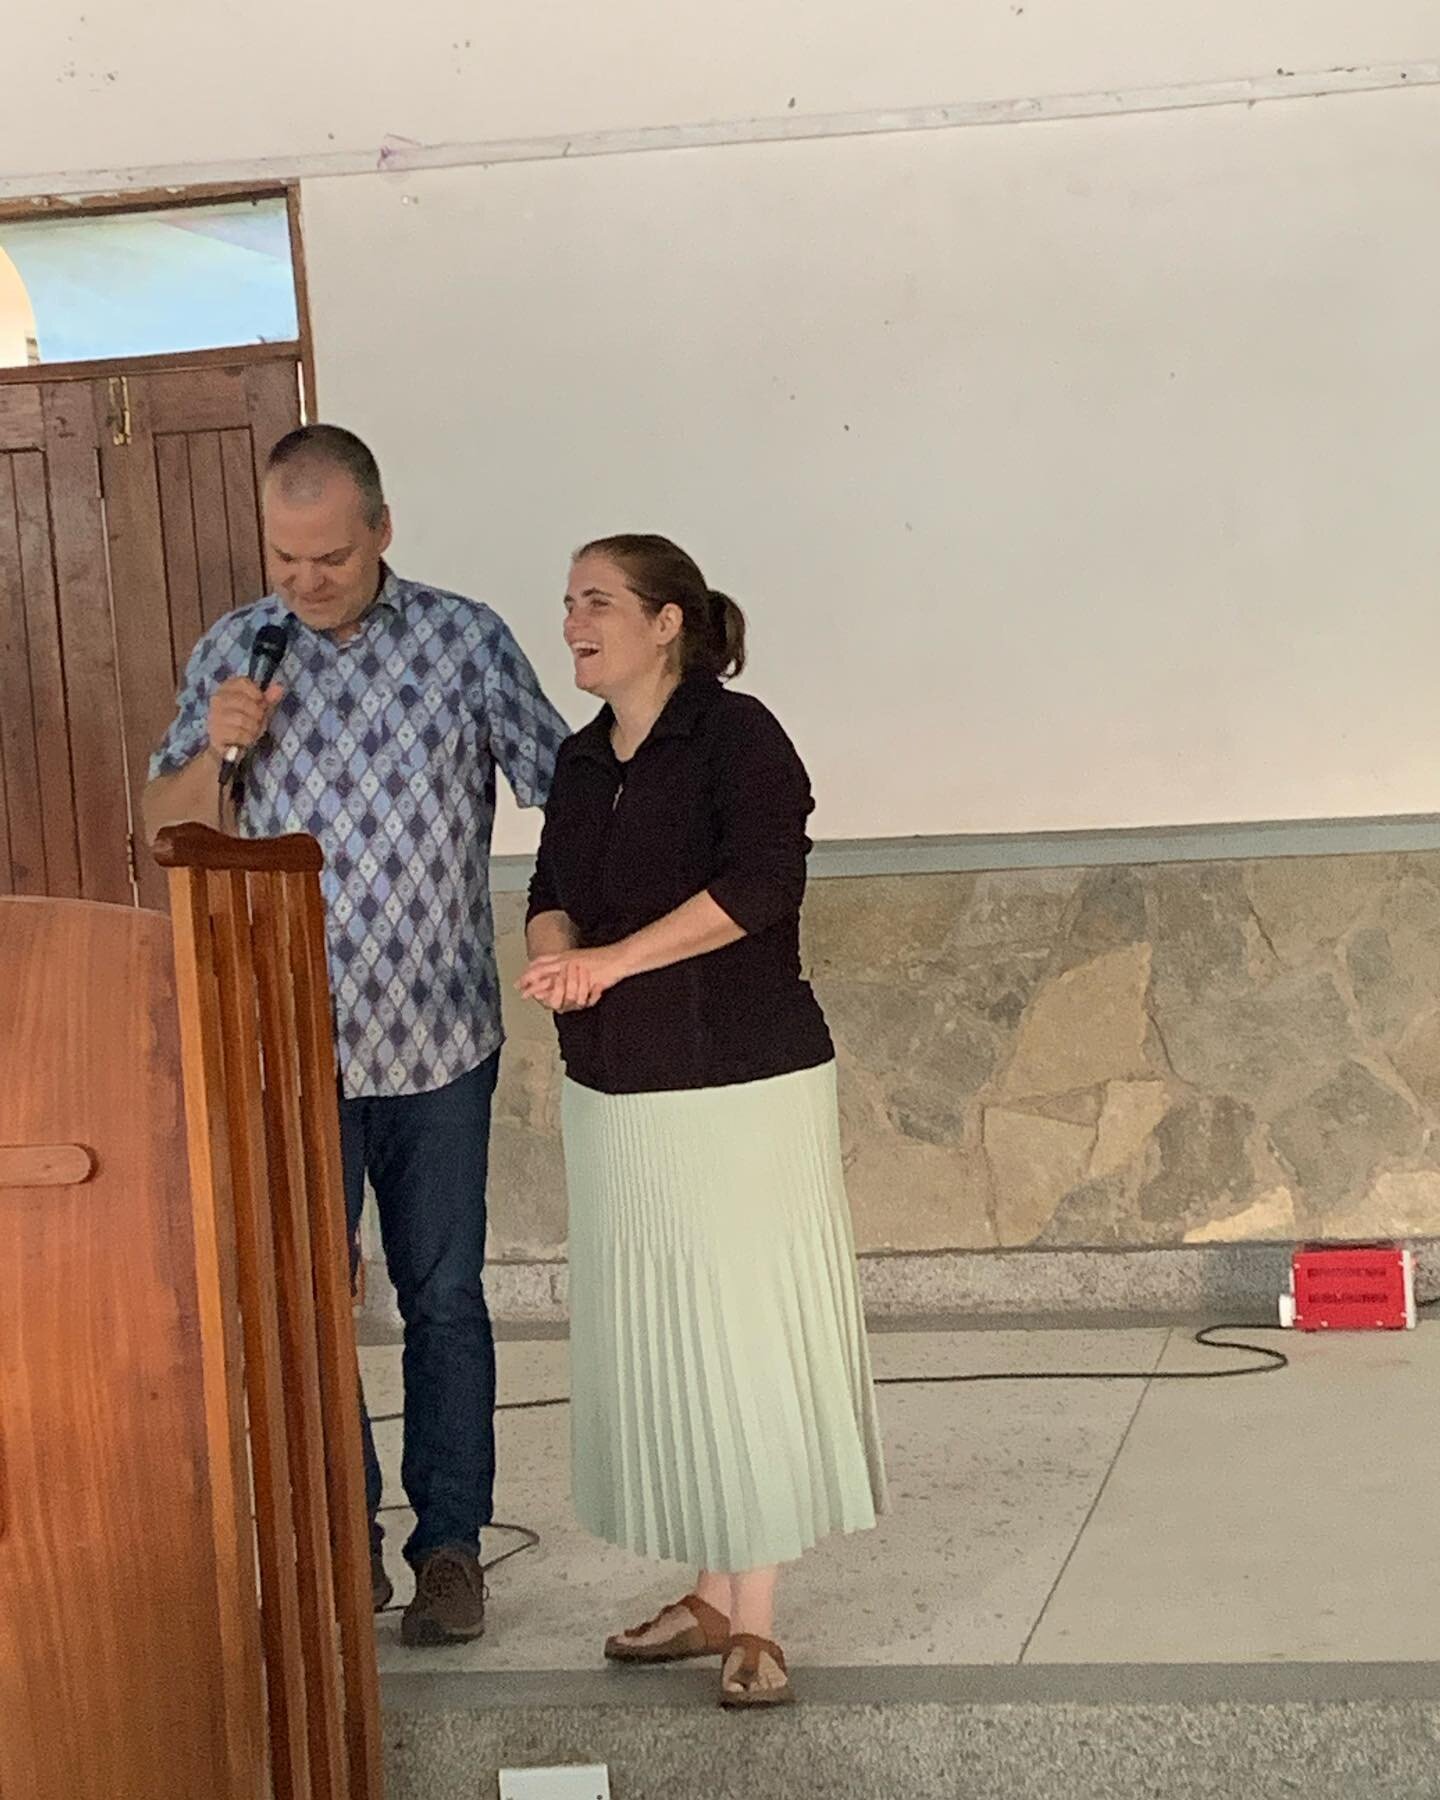 It is always a blessing hearing from friends who come over to love on us.This morning we got to hear powerful testimonies from our friends about the mighty move of God in the refugee camps they ministered.

We were also encouraged from the book of Ru